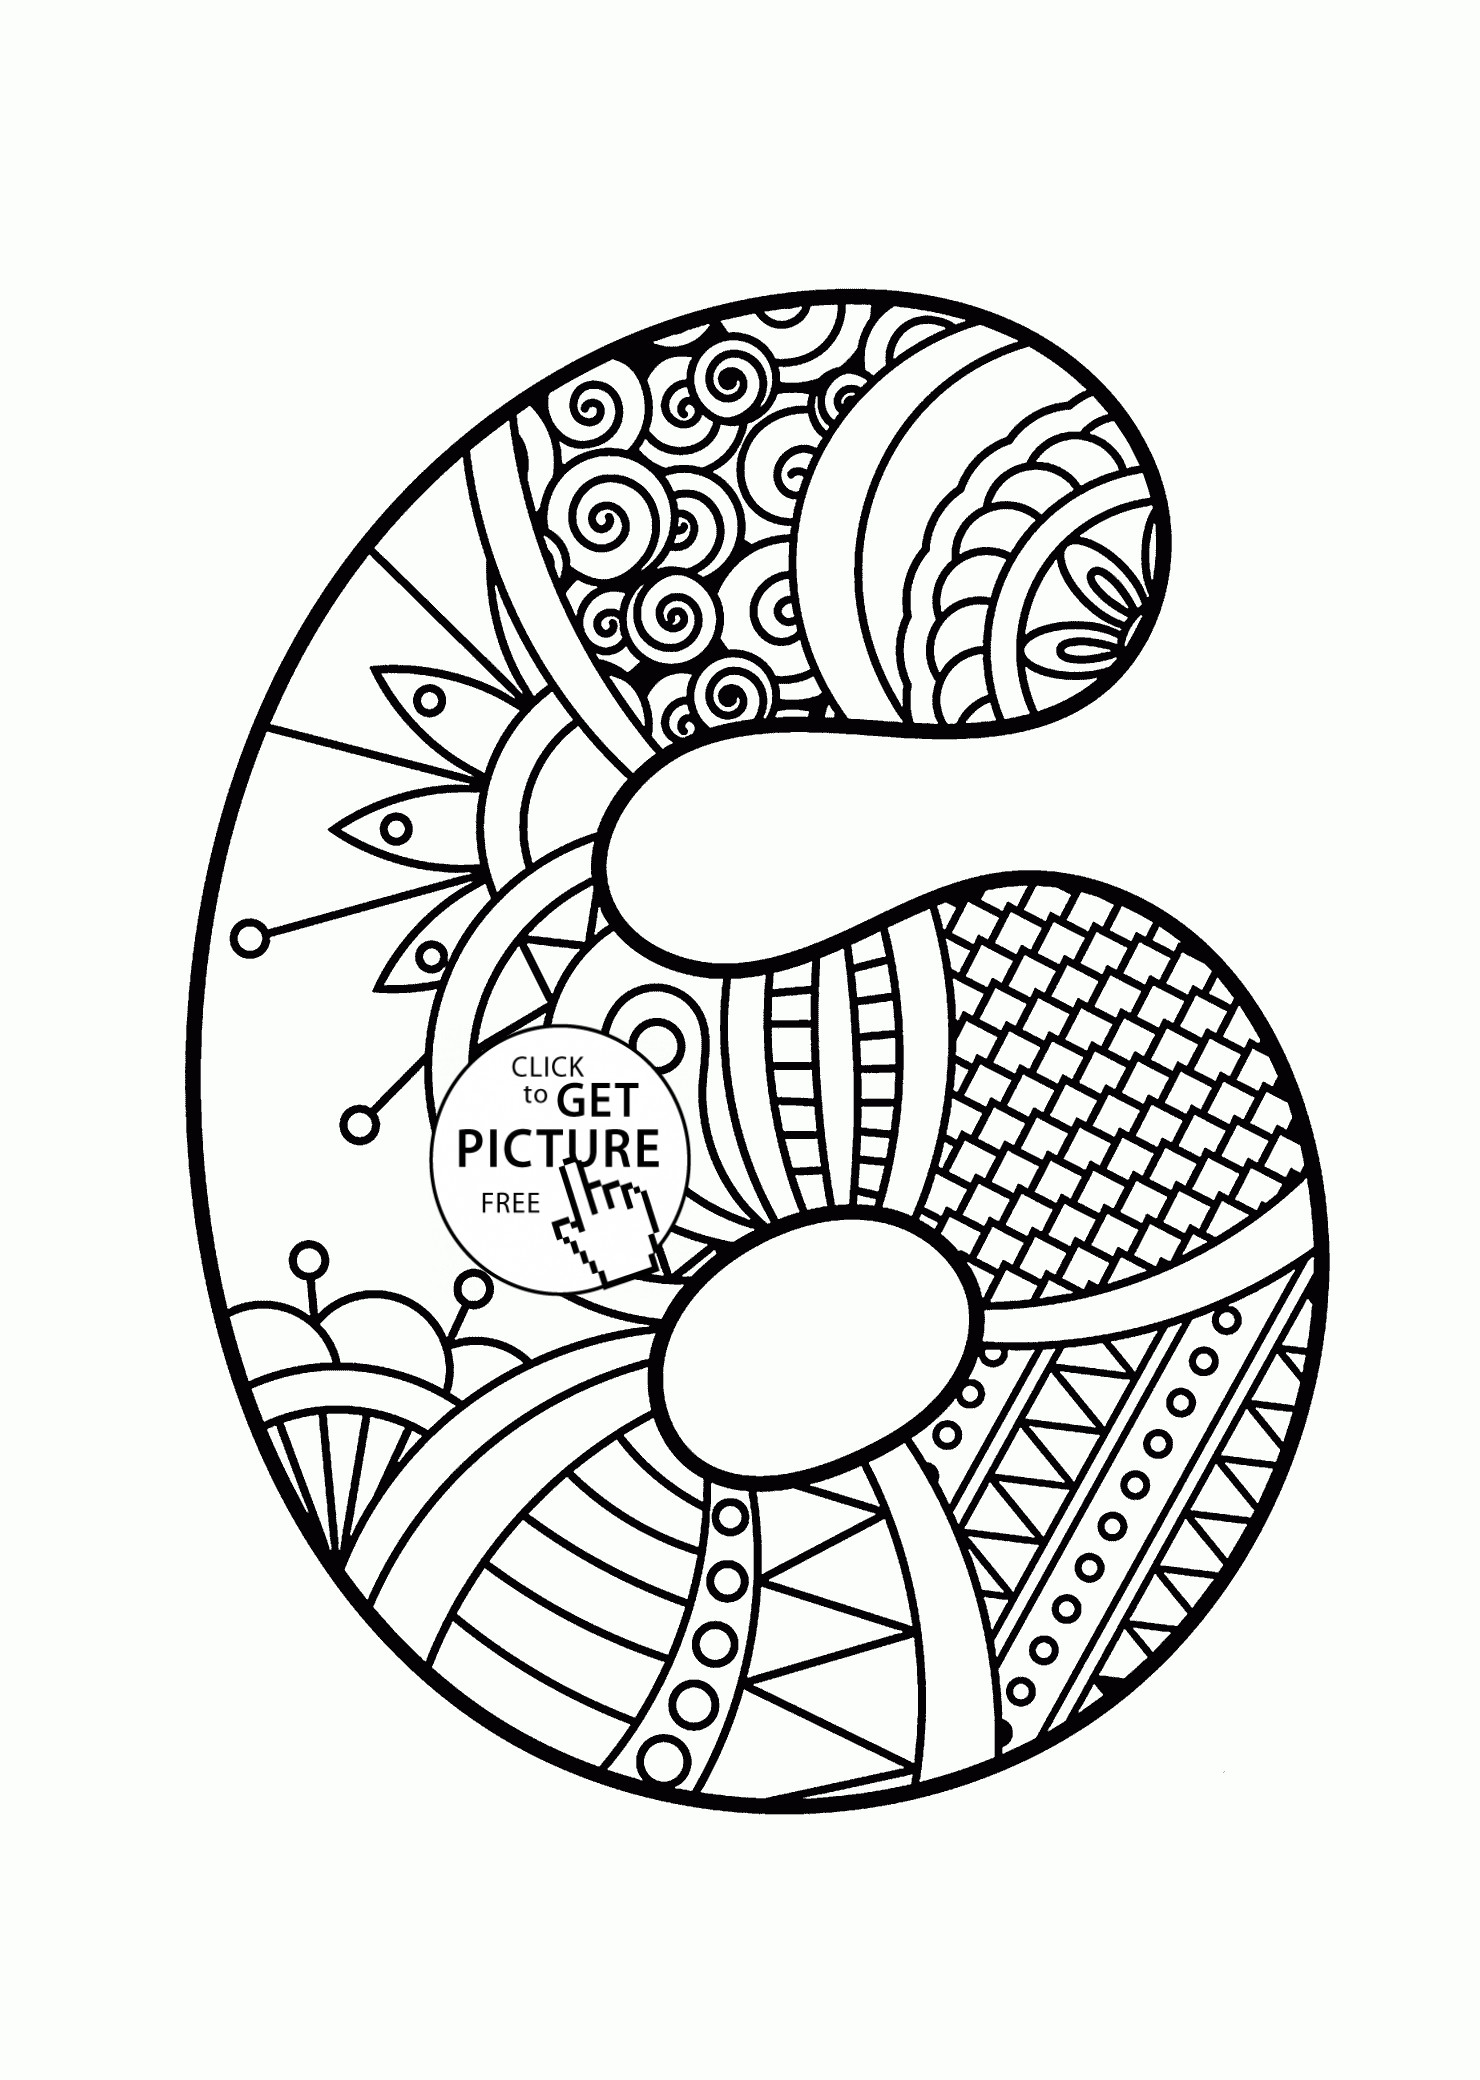 Pattern Coloring Pages For Kids
 Pattern Number 6 coloring pages for kids counting numbers